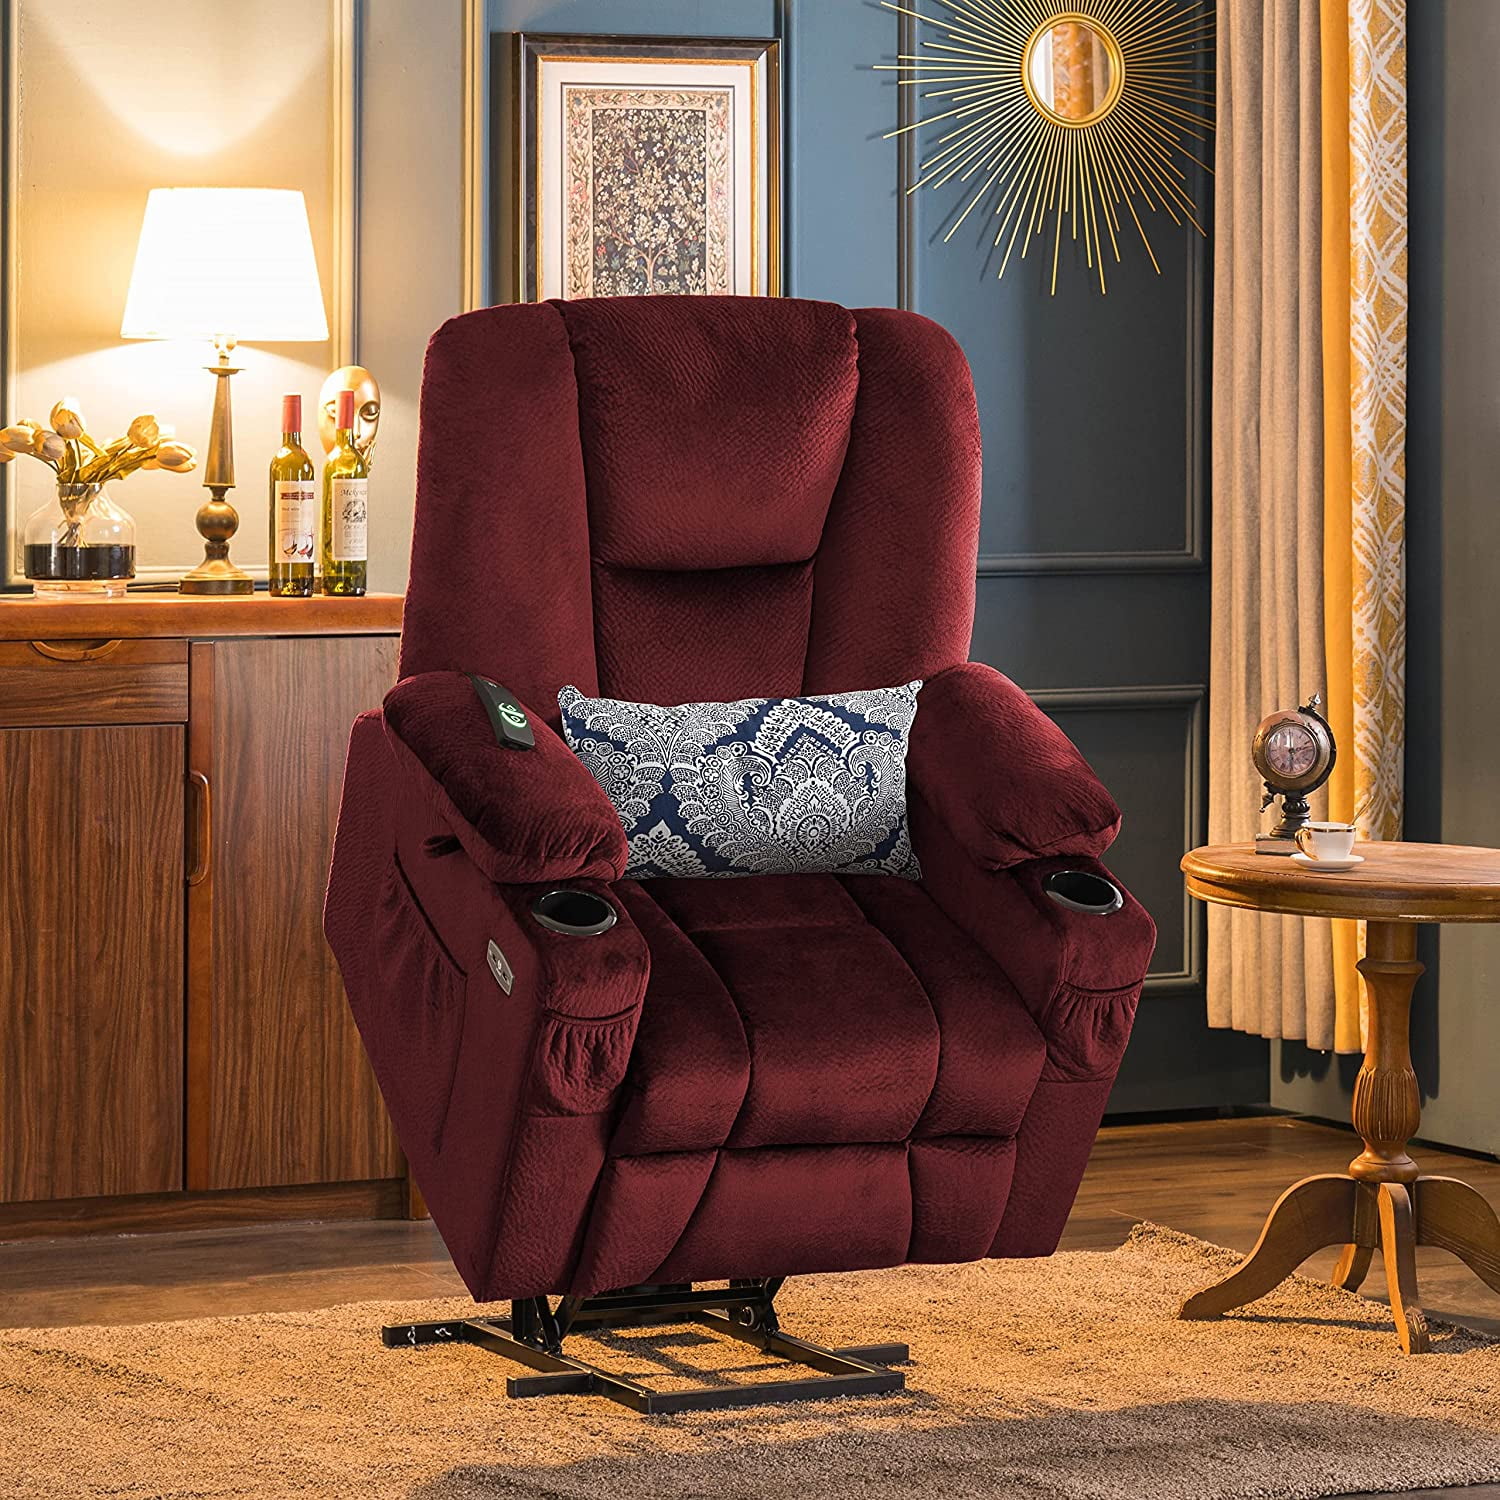 Mcombo Electric Power Lift Recliner Chair with Extended Footrest